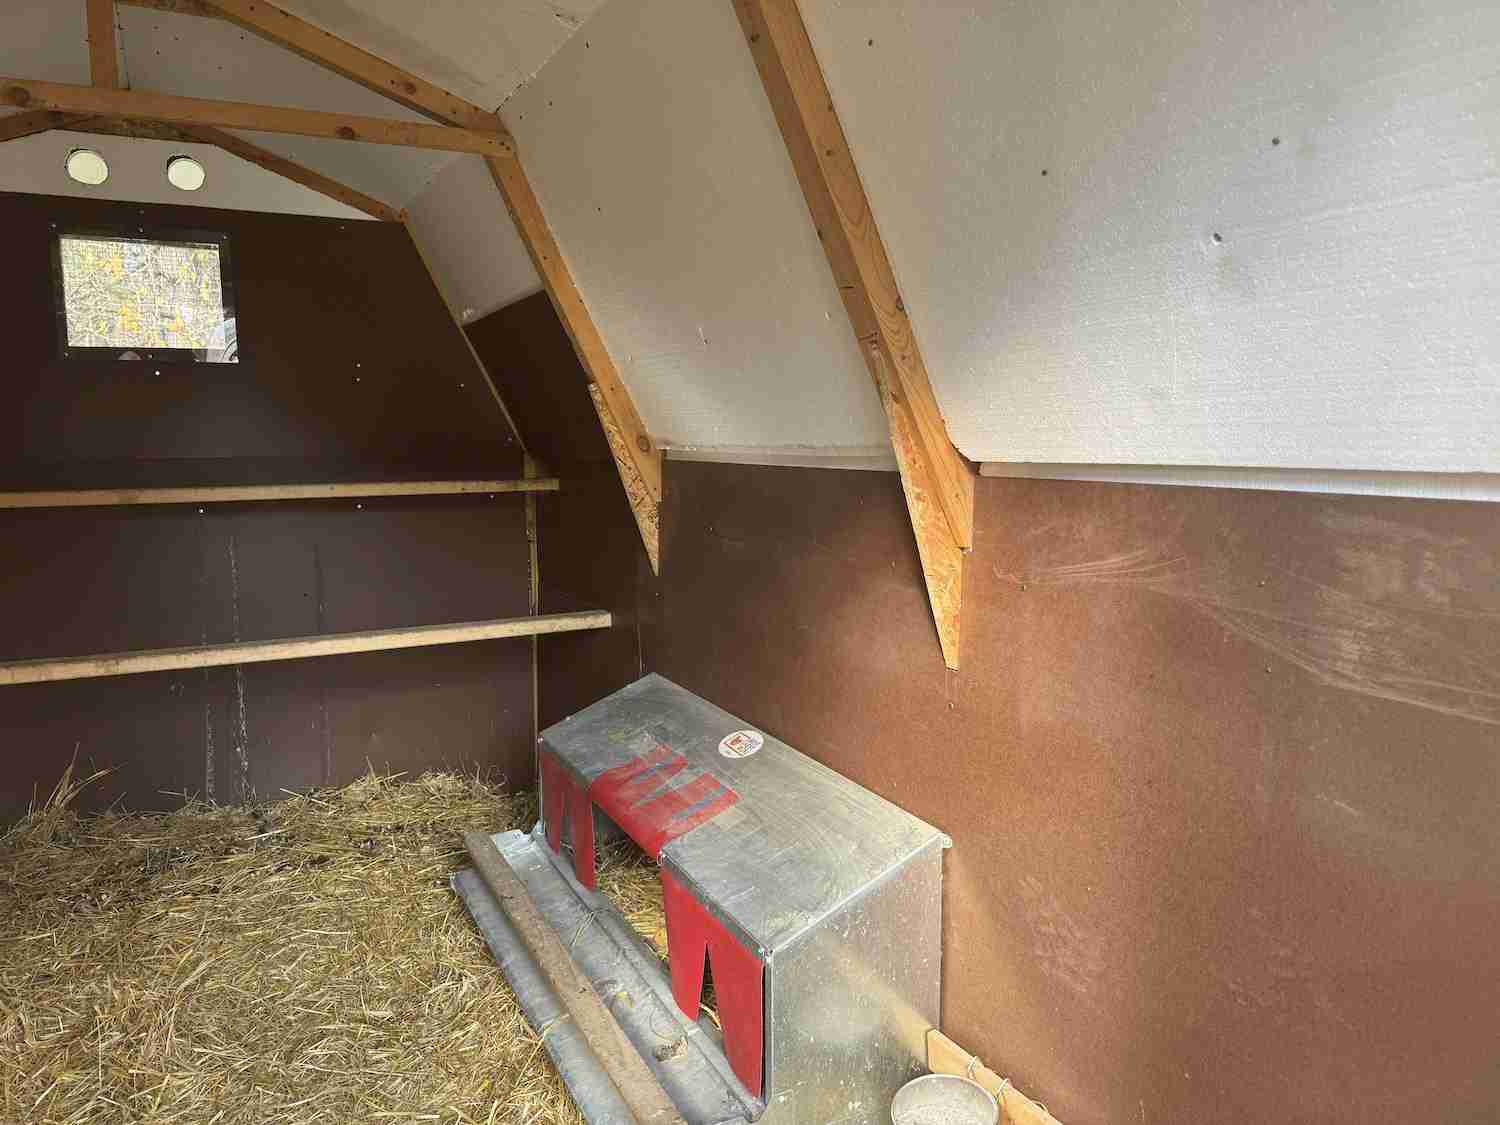 A photo showing use of 1 1/2" styrofoam as insulation in the coop